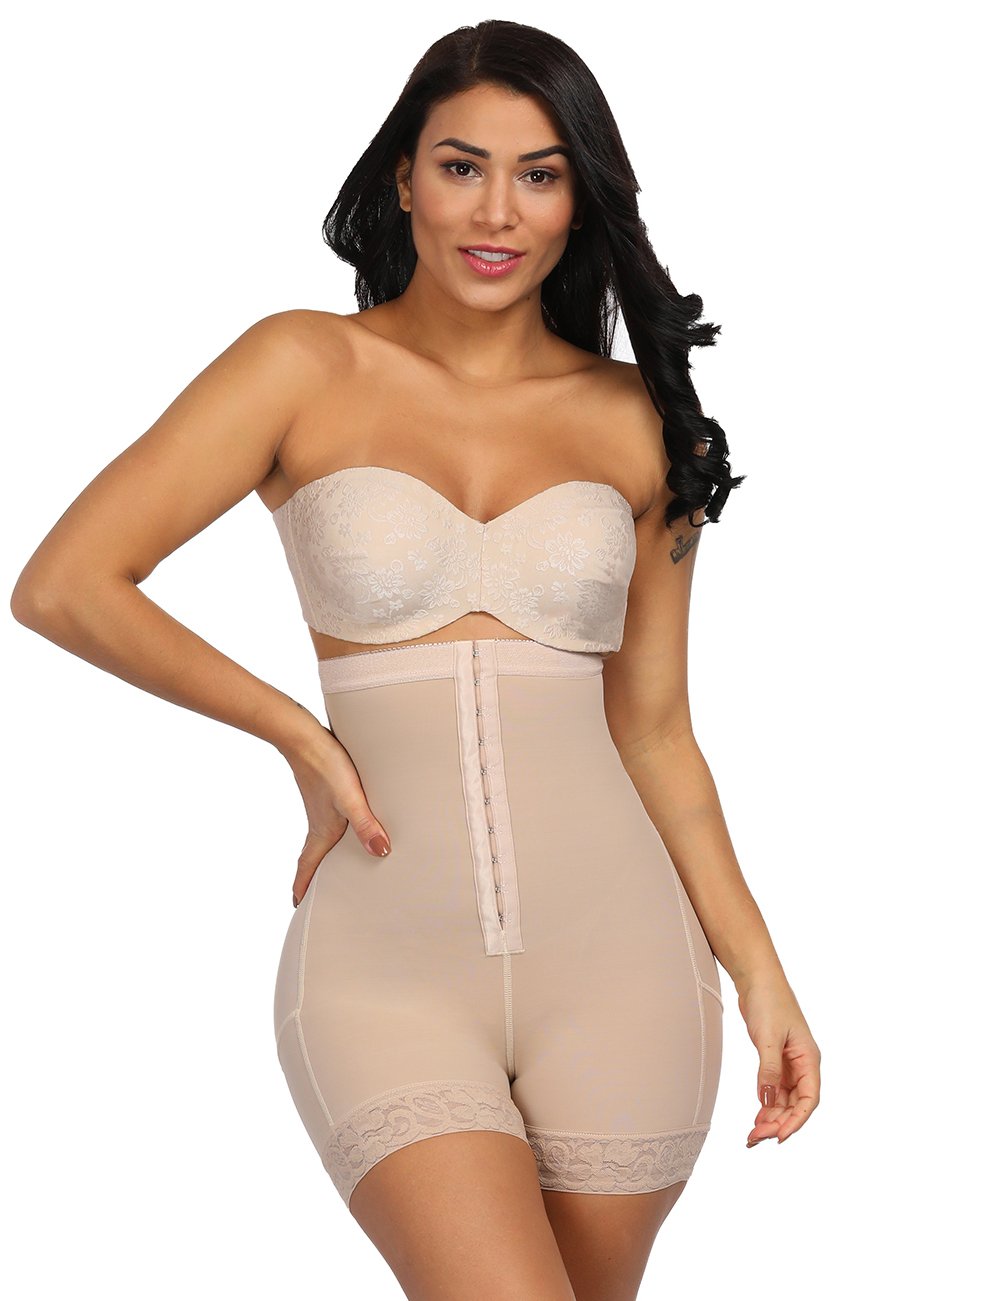 Buy COMFREE All in One Control Body Shaper Firm Tummy Control